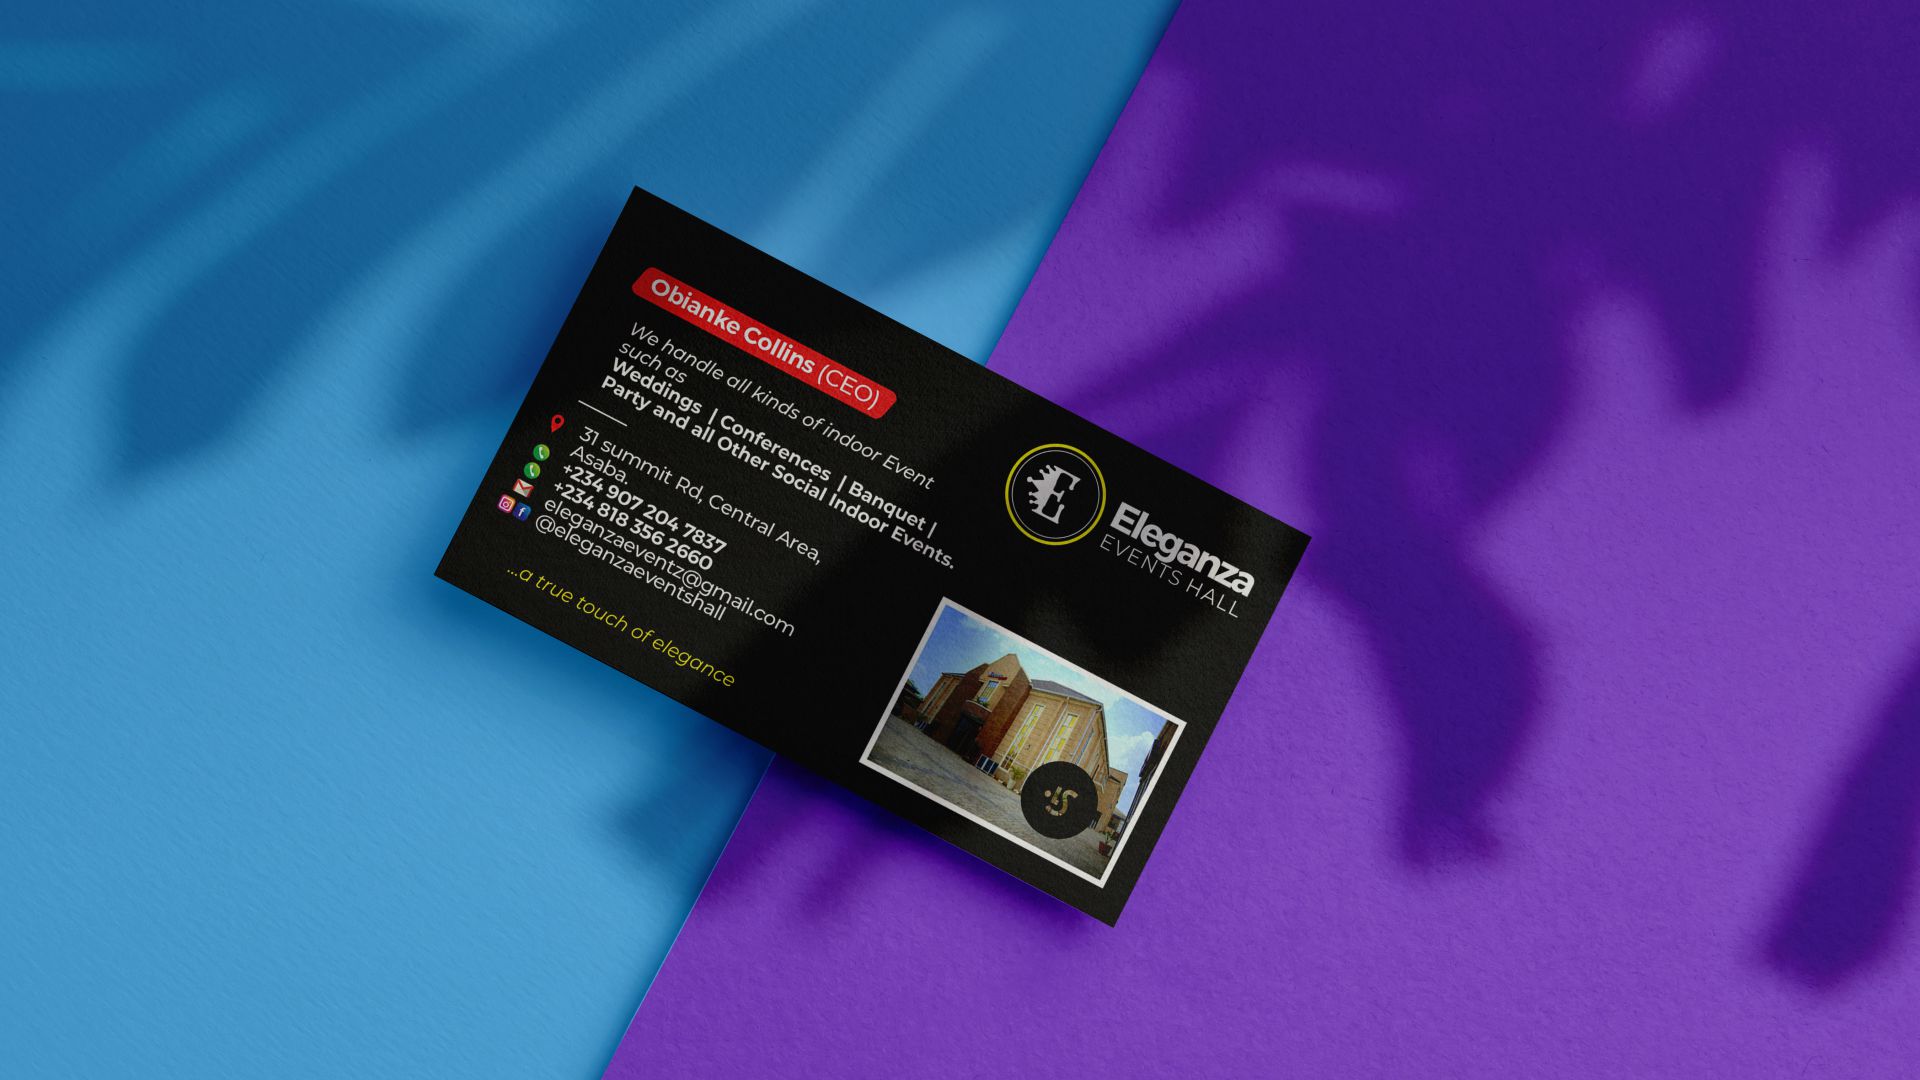 Creative Single-sided Business Card Design and Printing